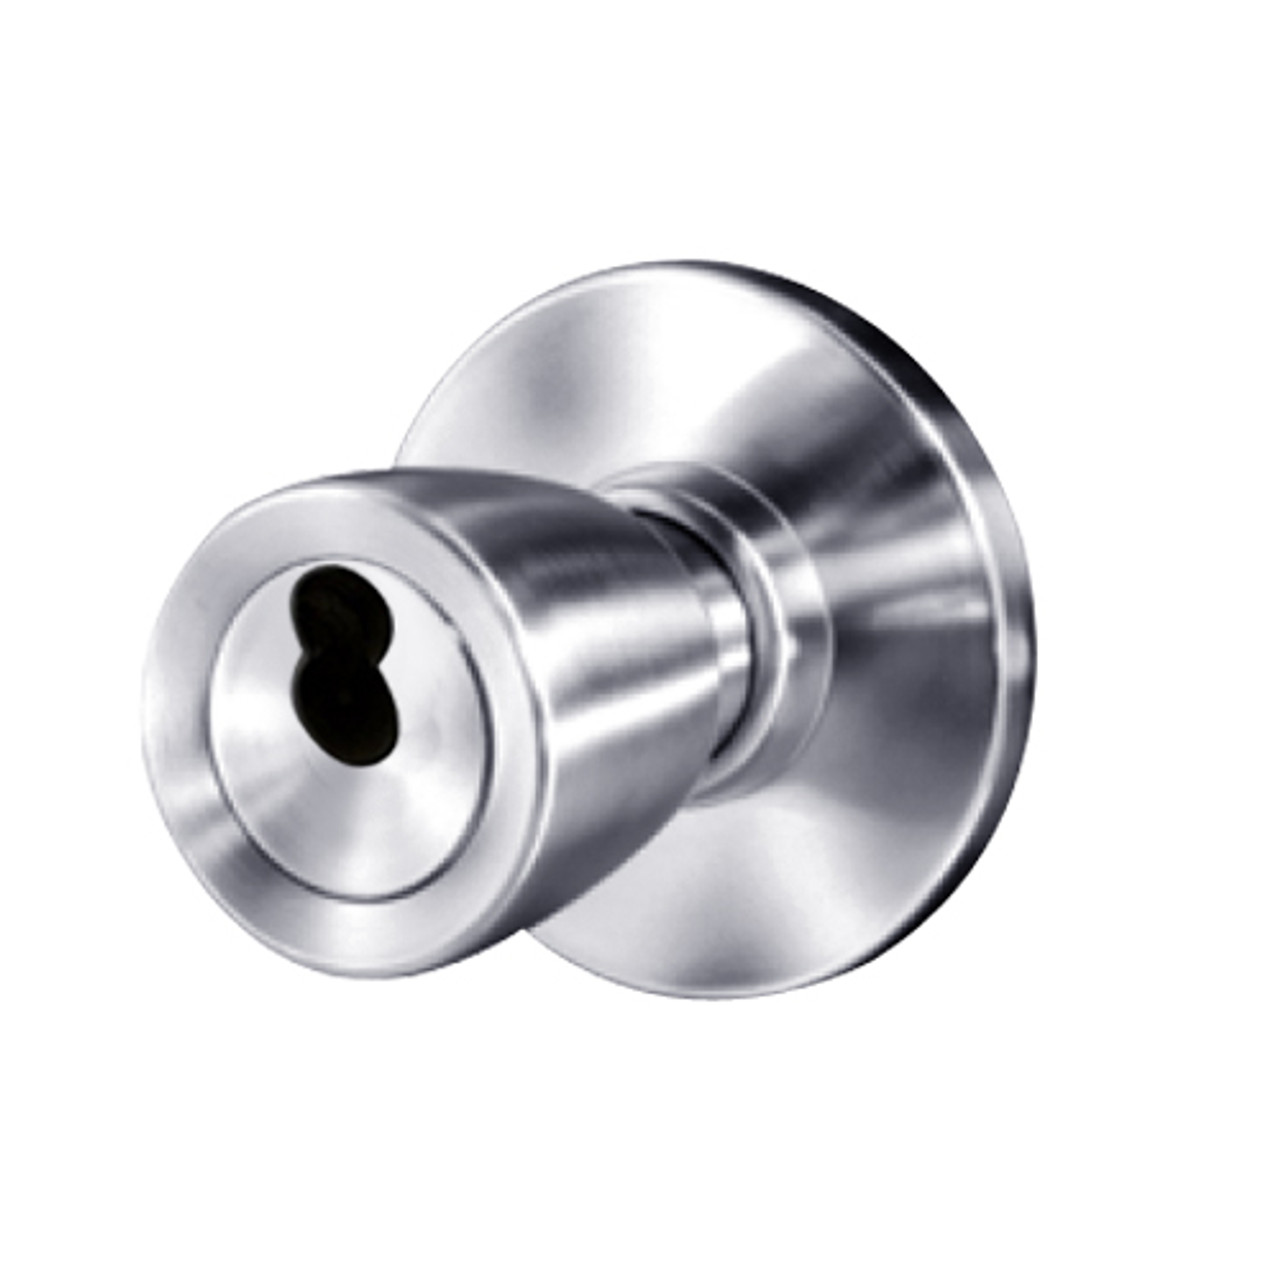 8K47YR6AS3626 Best 8K Series Exit Heavy Duty Cylindrical Knob Locks with Tulip Style in Satin Chrome